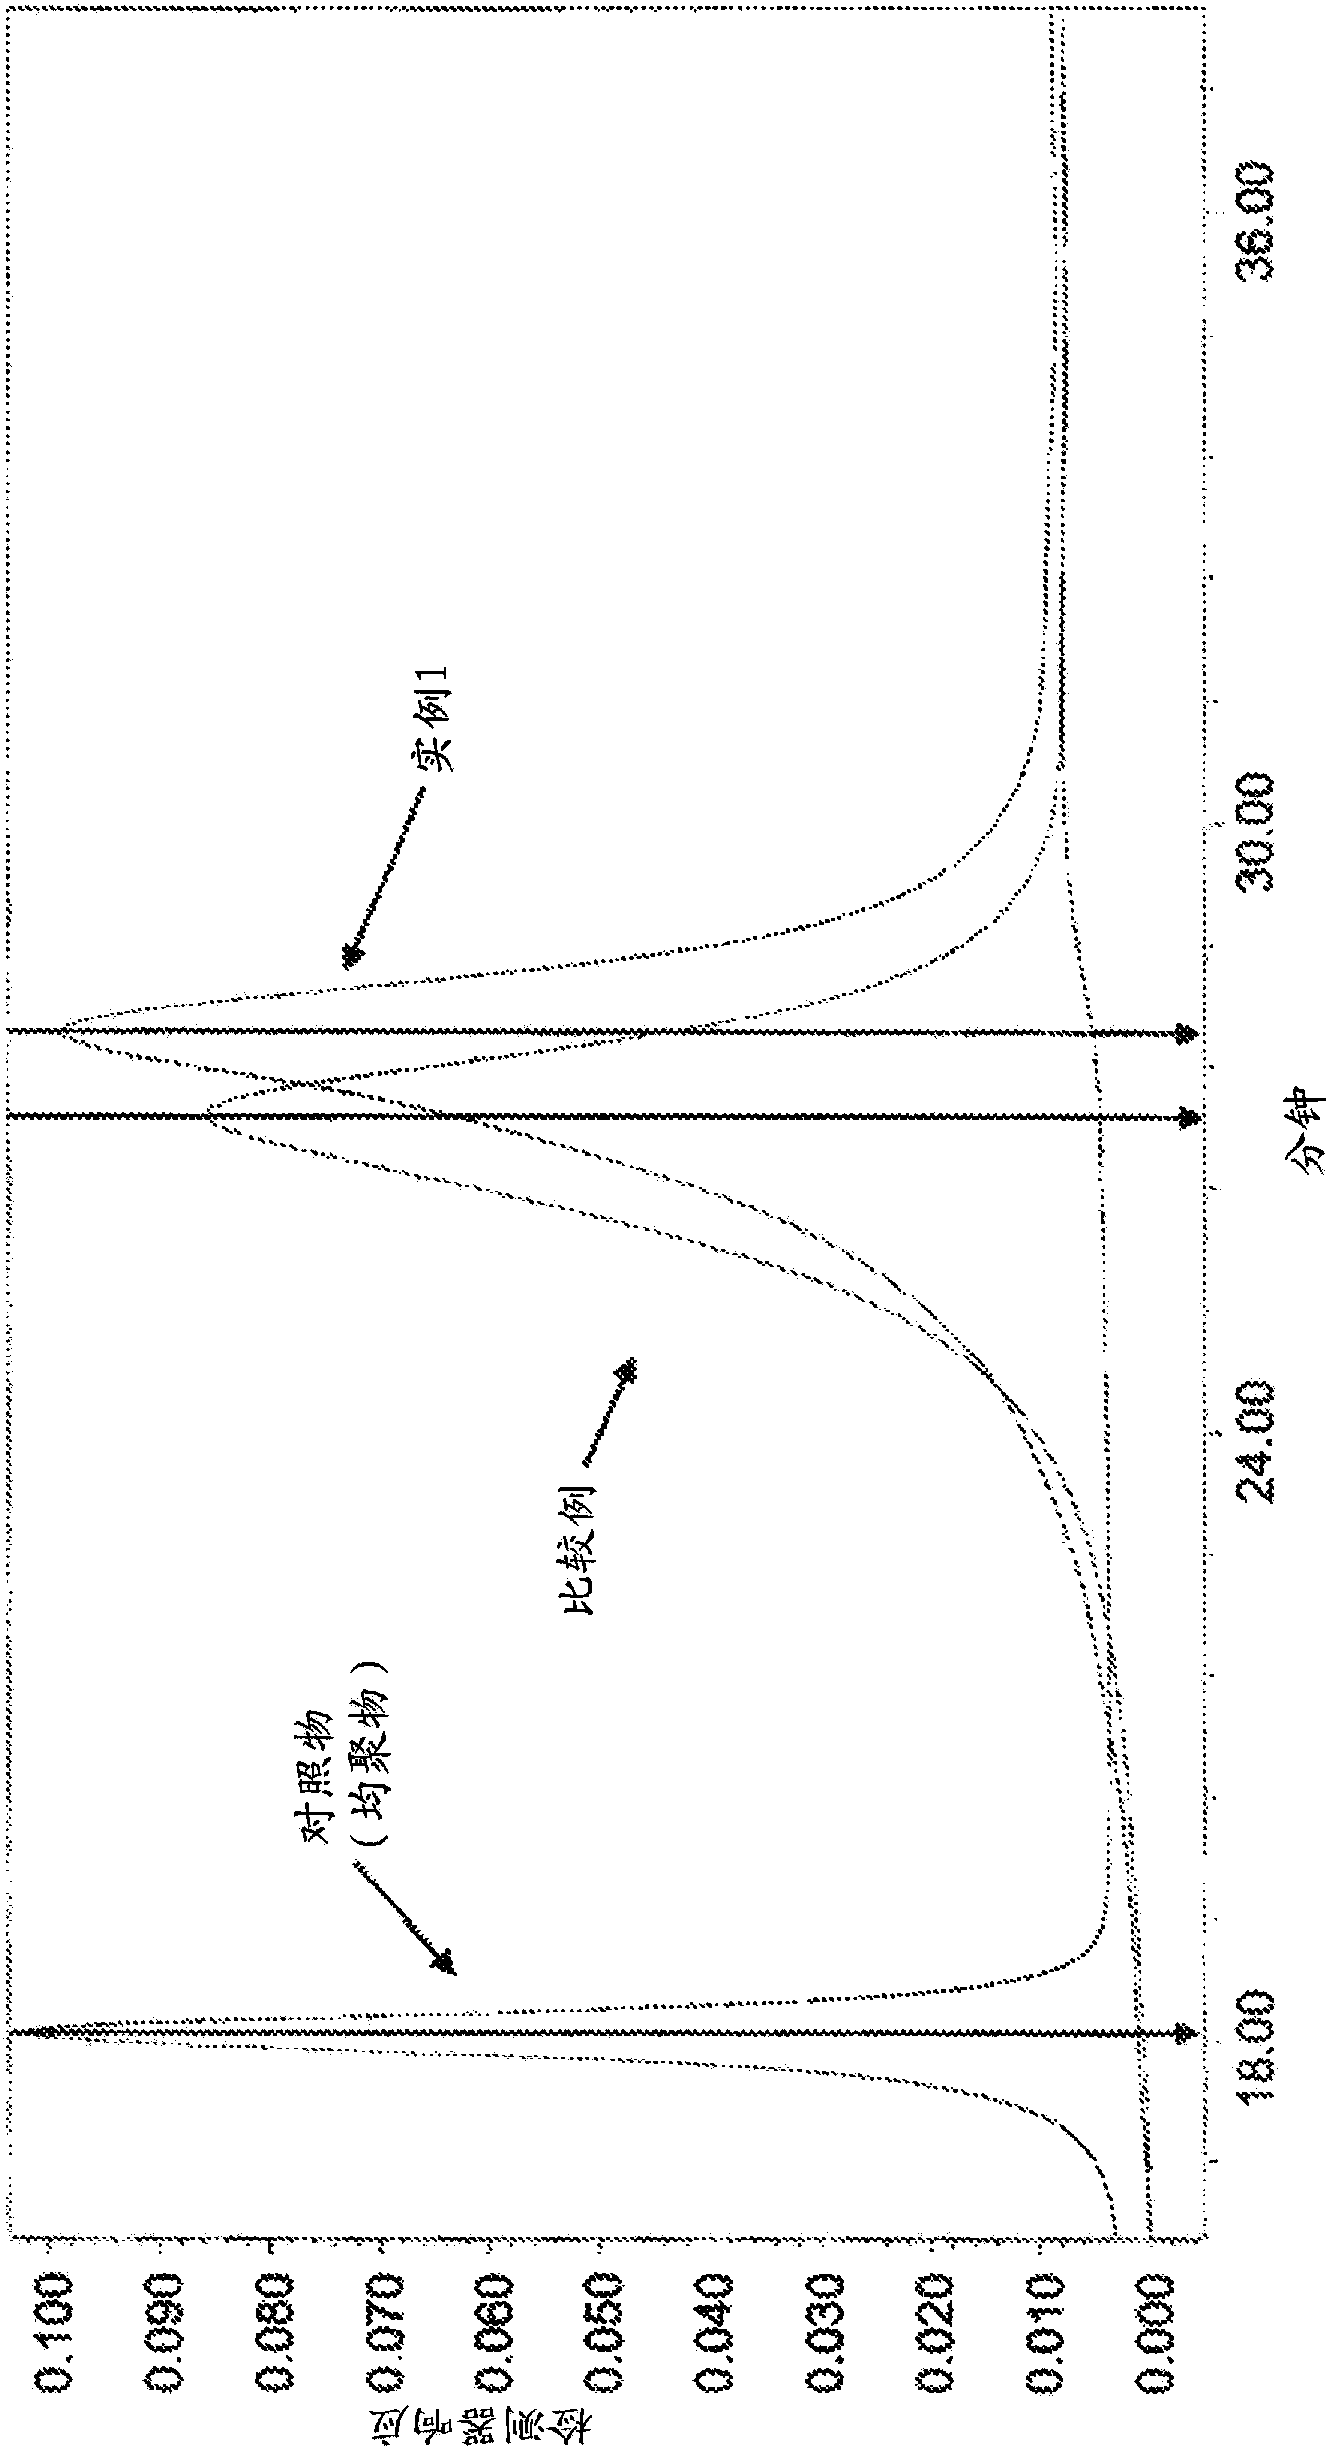 Process of forming aramid copolymer